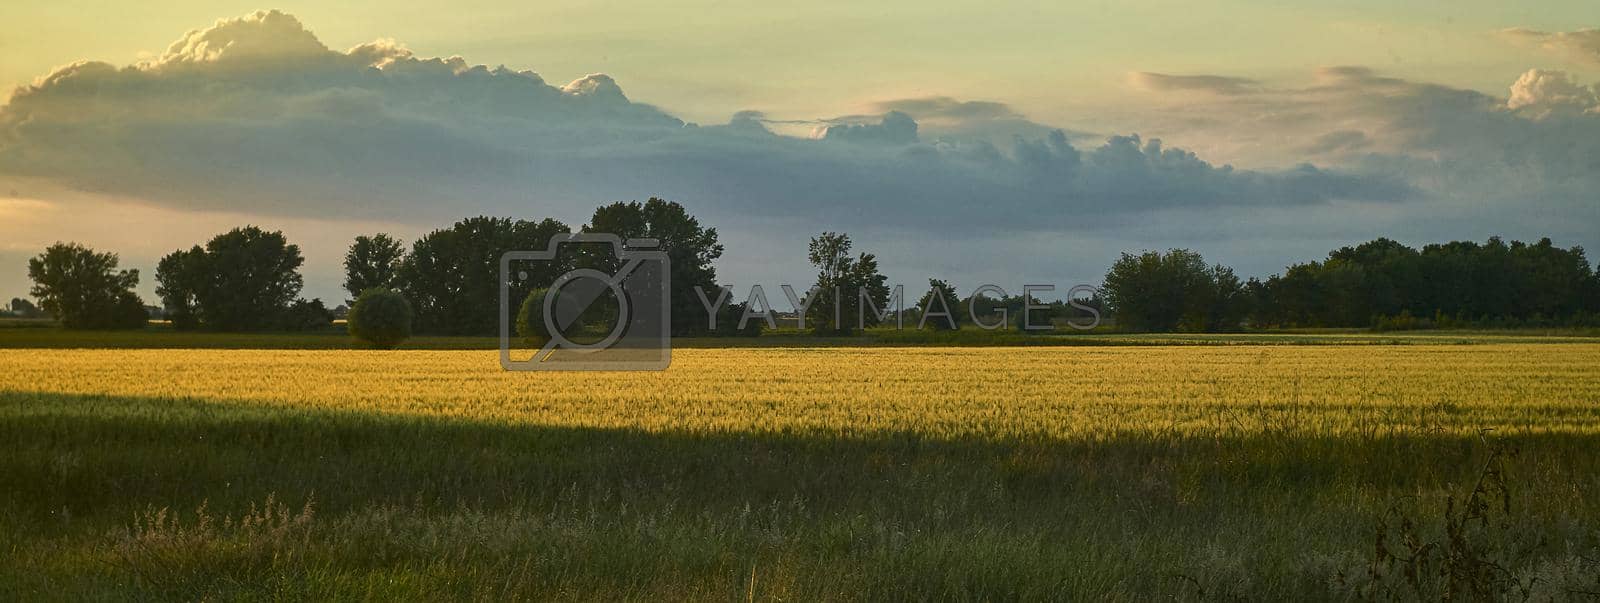 Countryside landscape detail, banner image with copy space